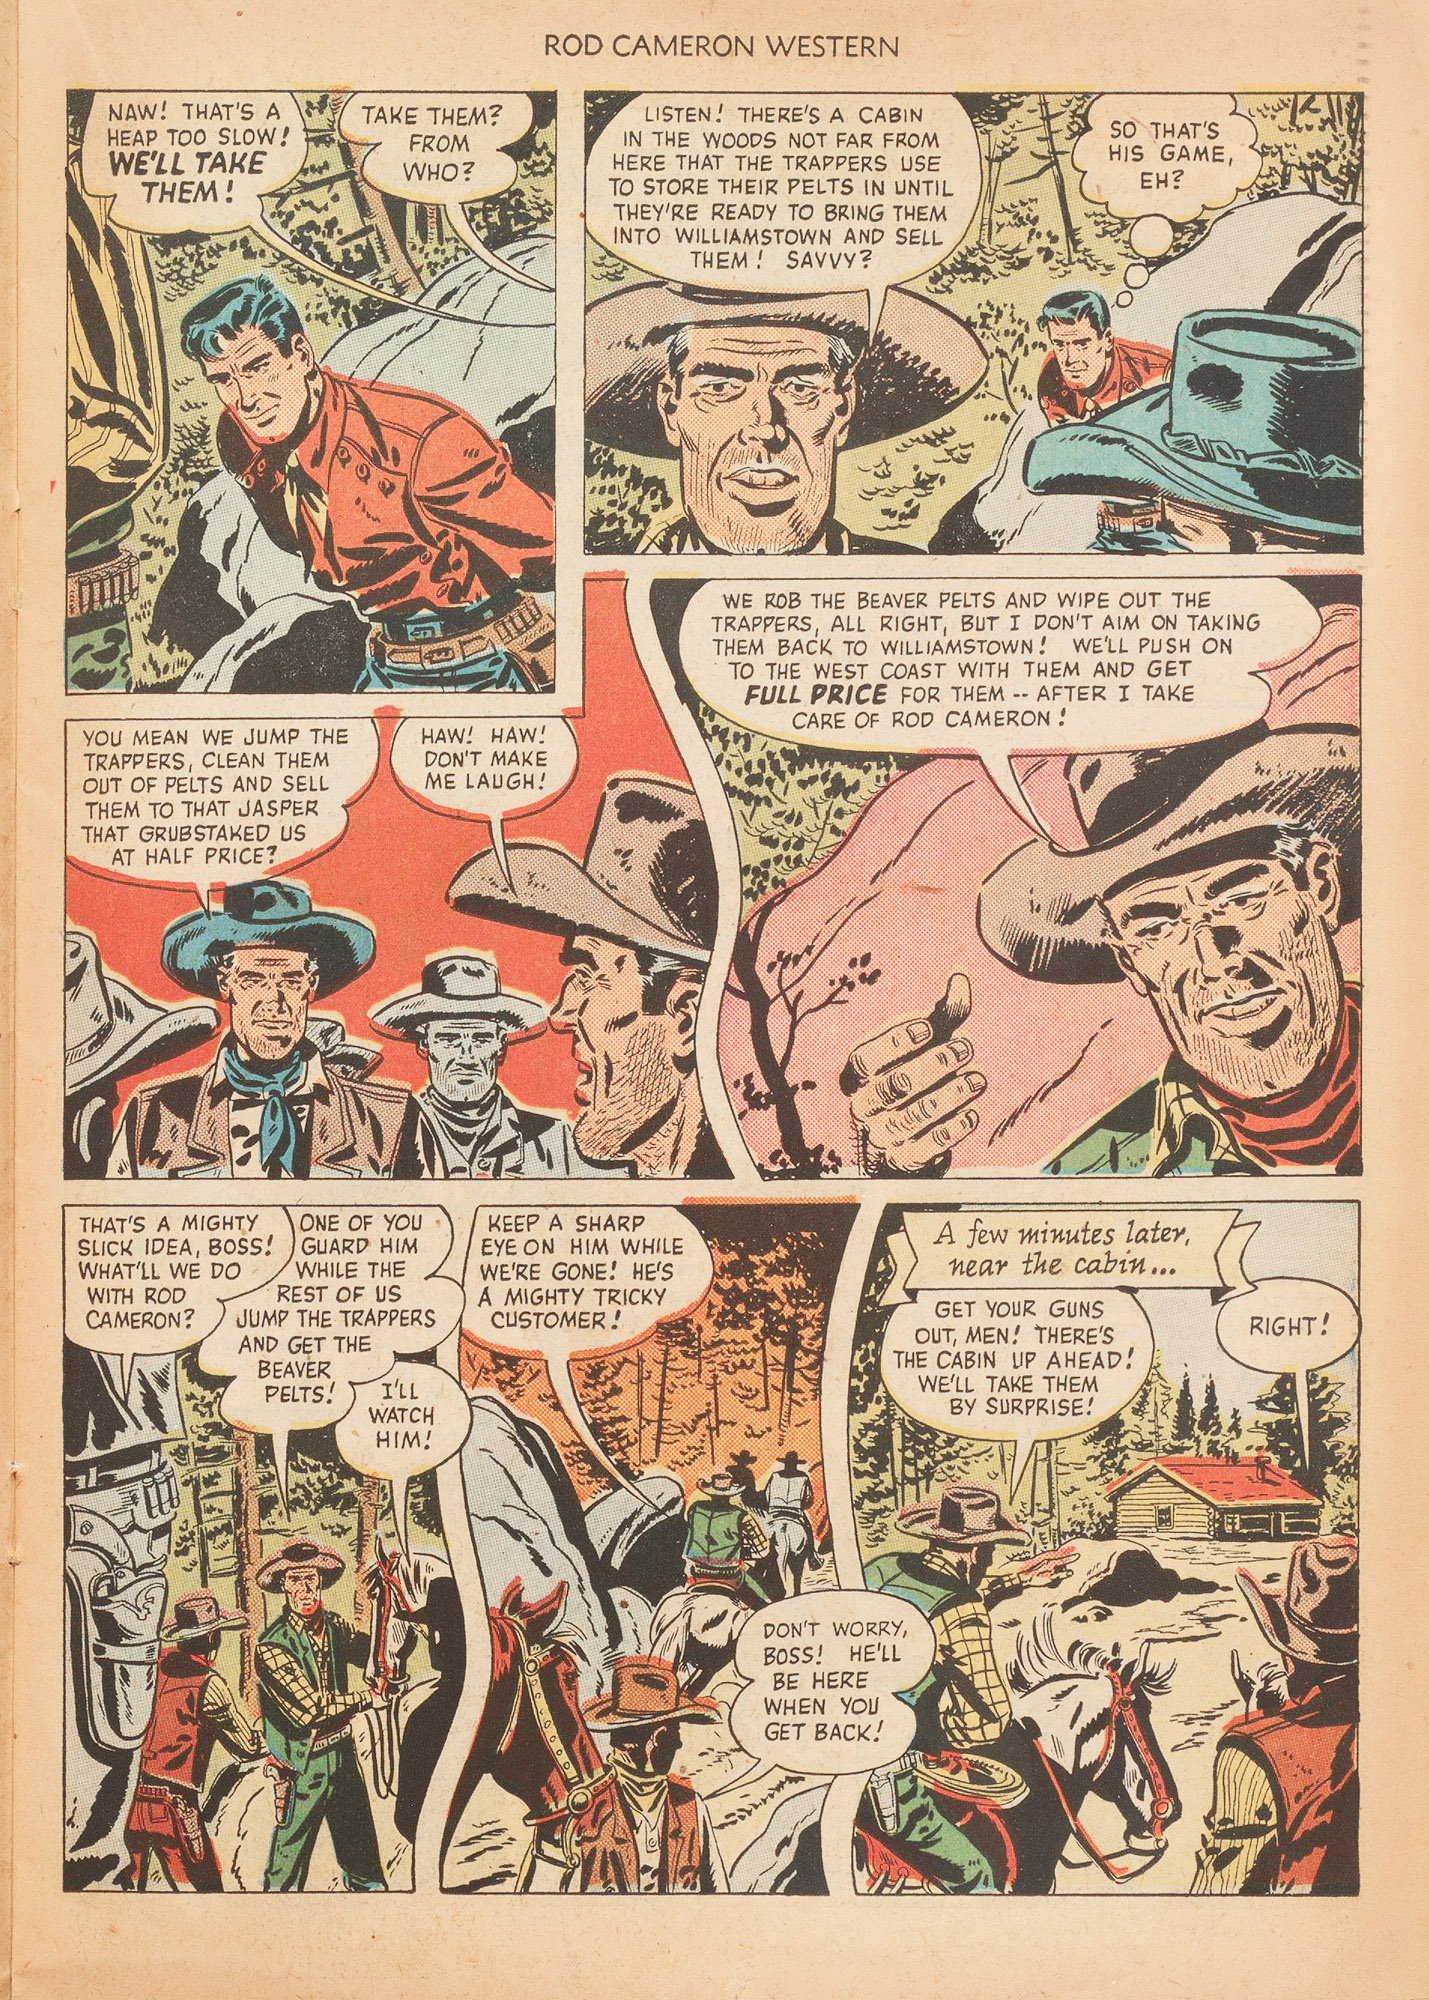 Read online Rod Cameron Western comic -  Issue #4 - 15